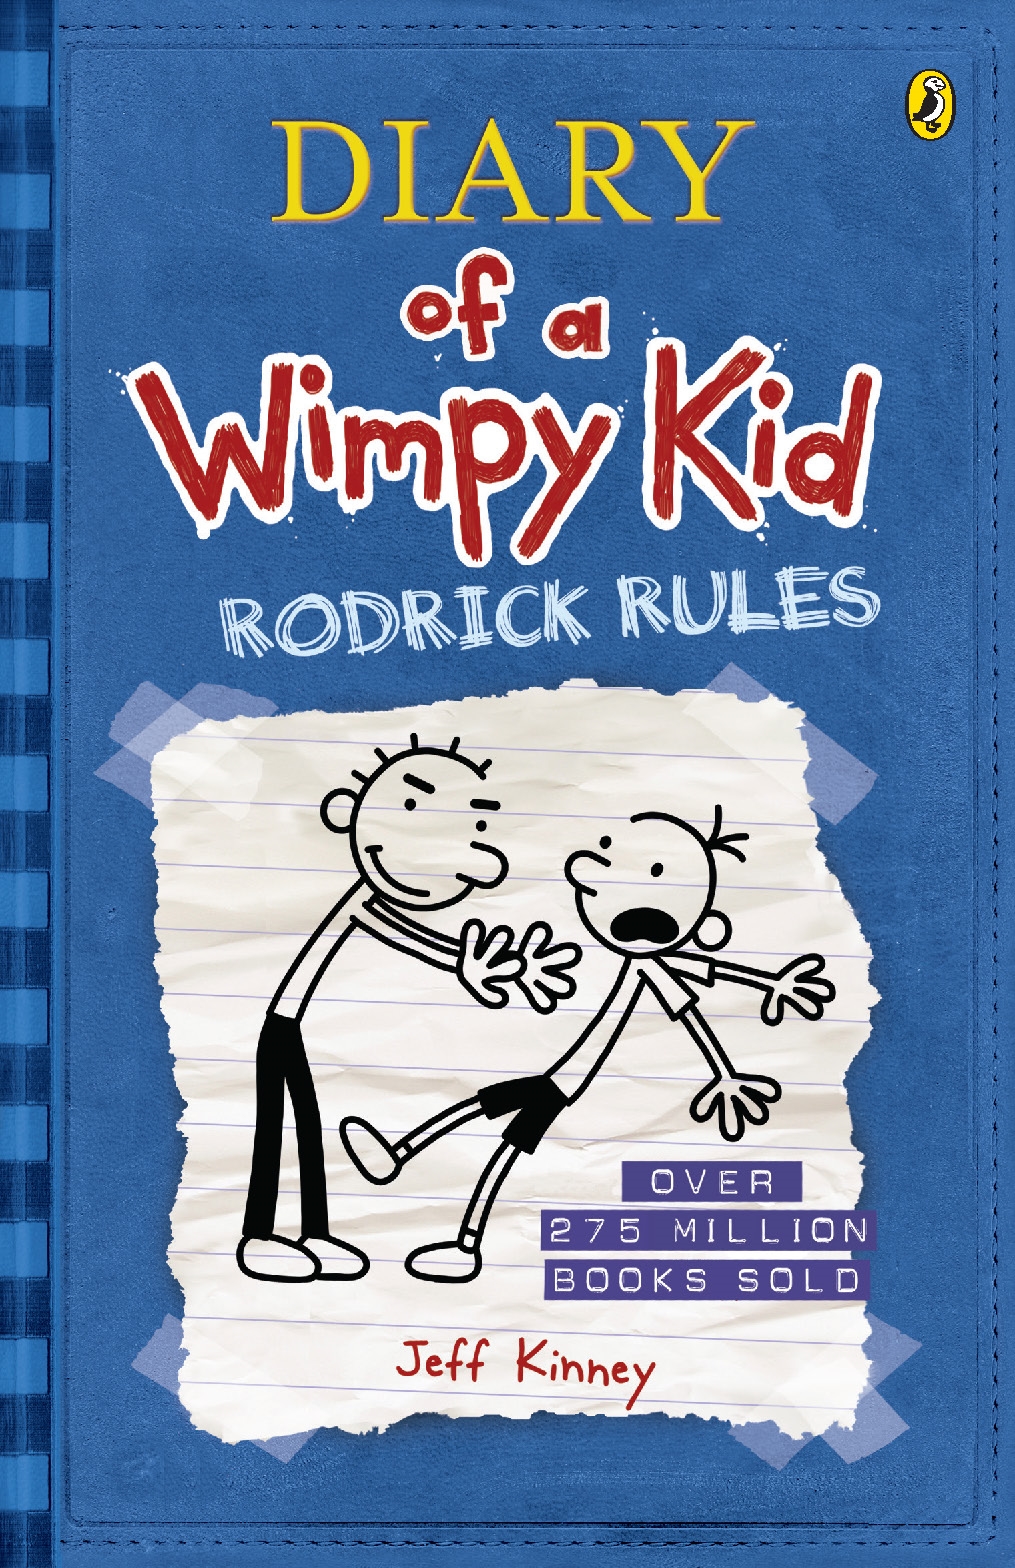 Diary-of-a-Wimpy-Kid-Rodrick-Rules